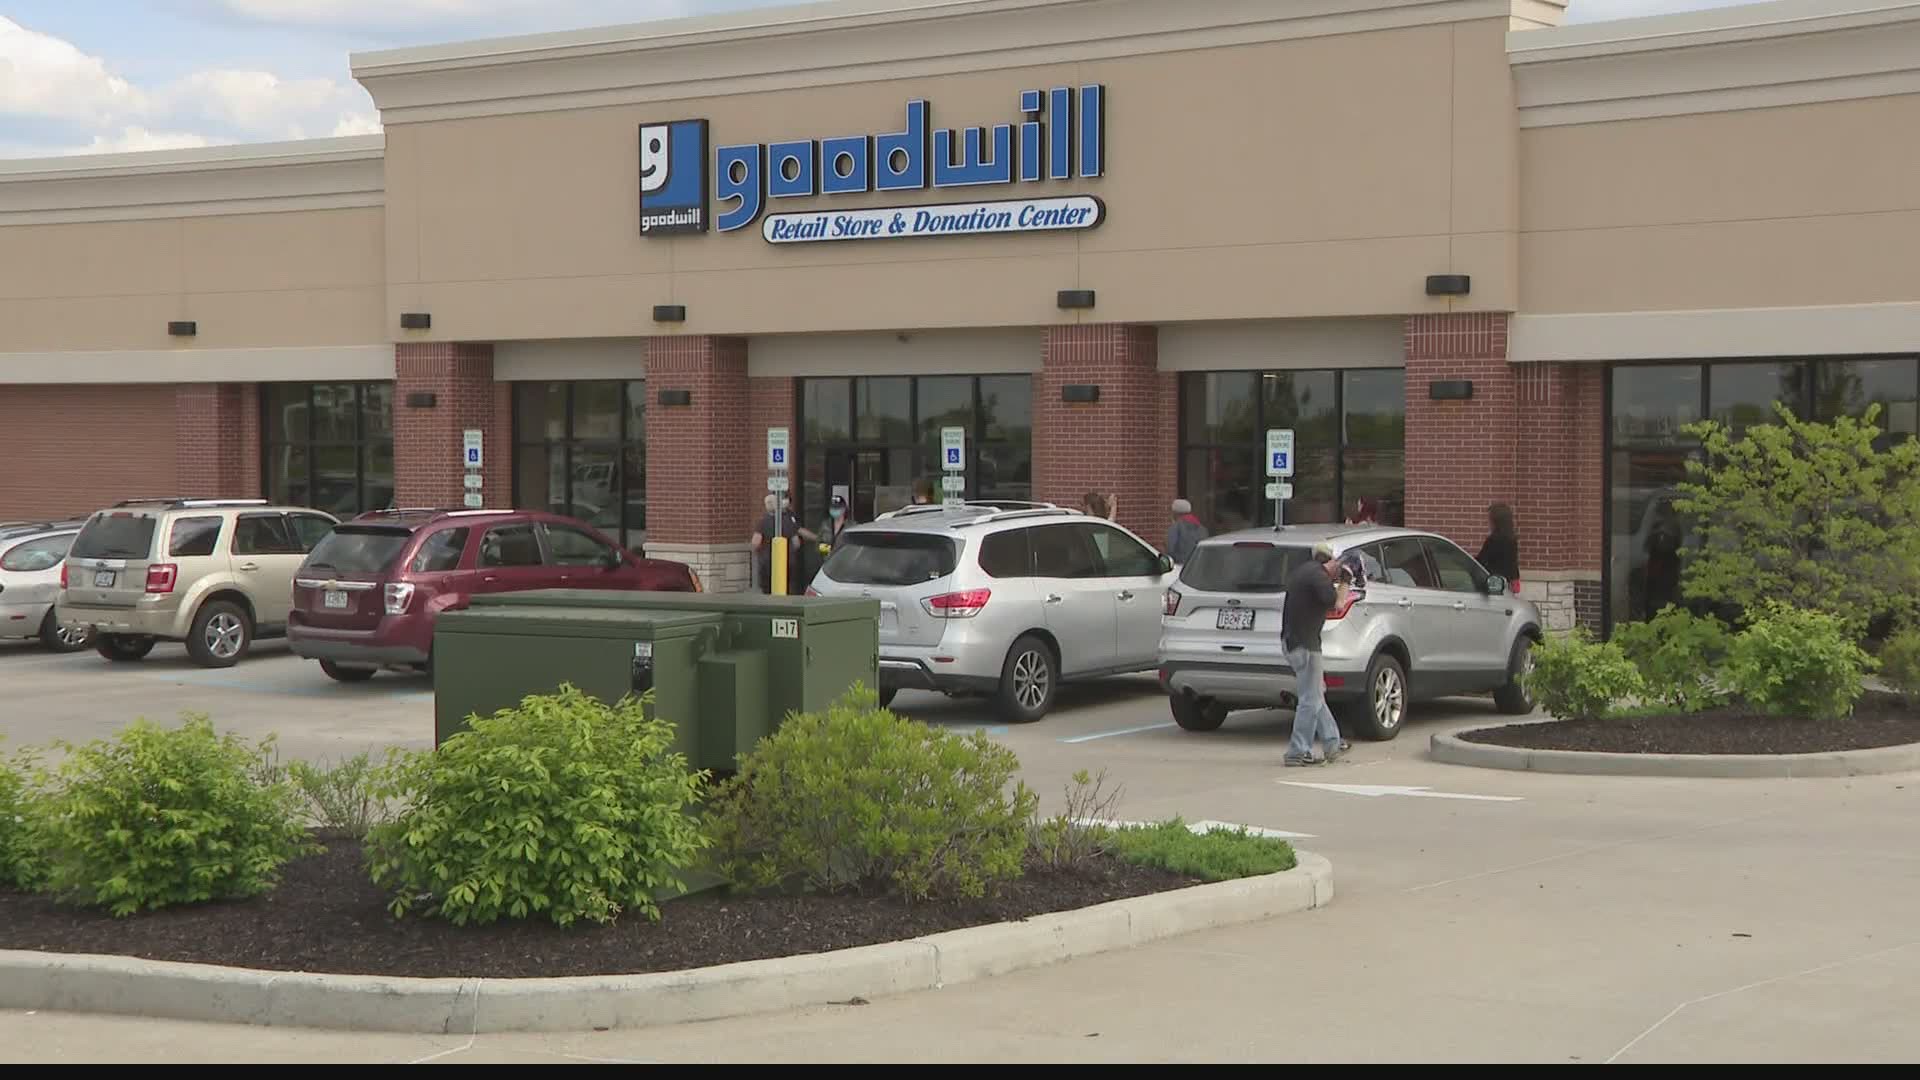 St. Louis: Goodwill to reopen May 18 | www.waterandnature.org